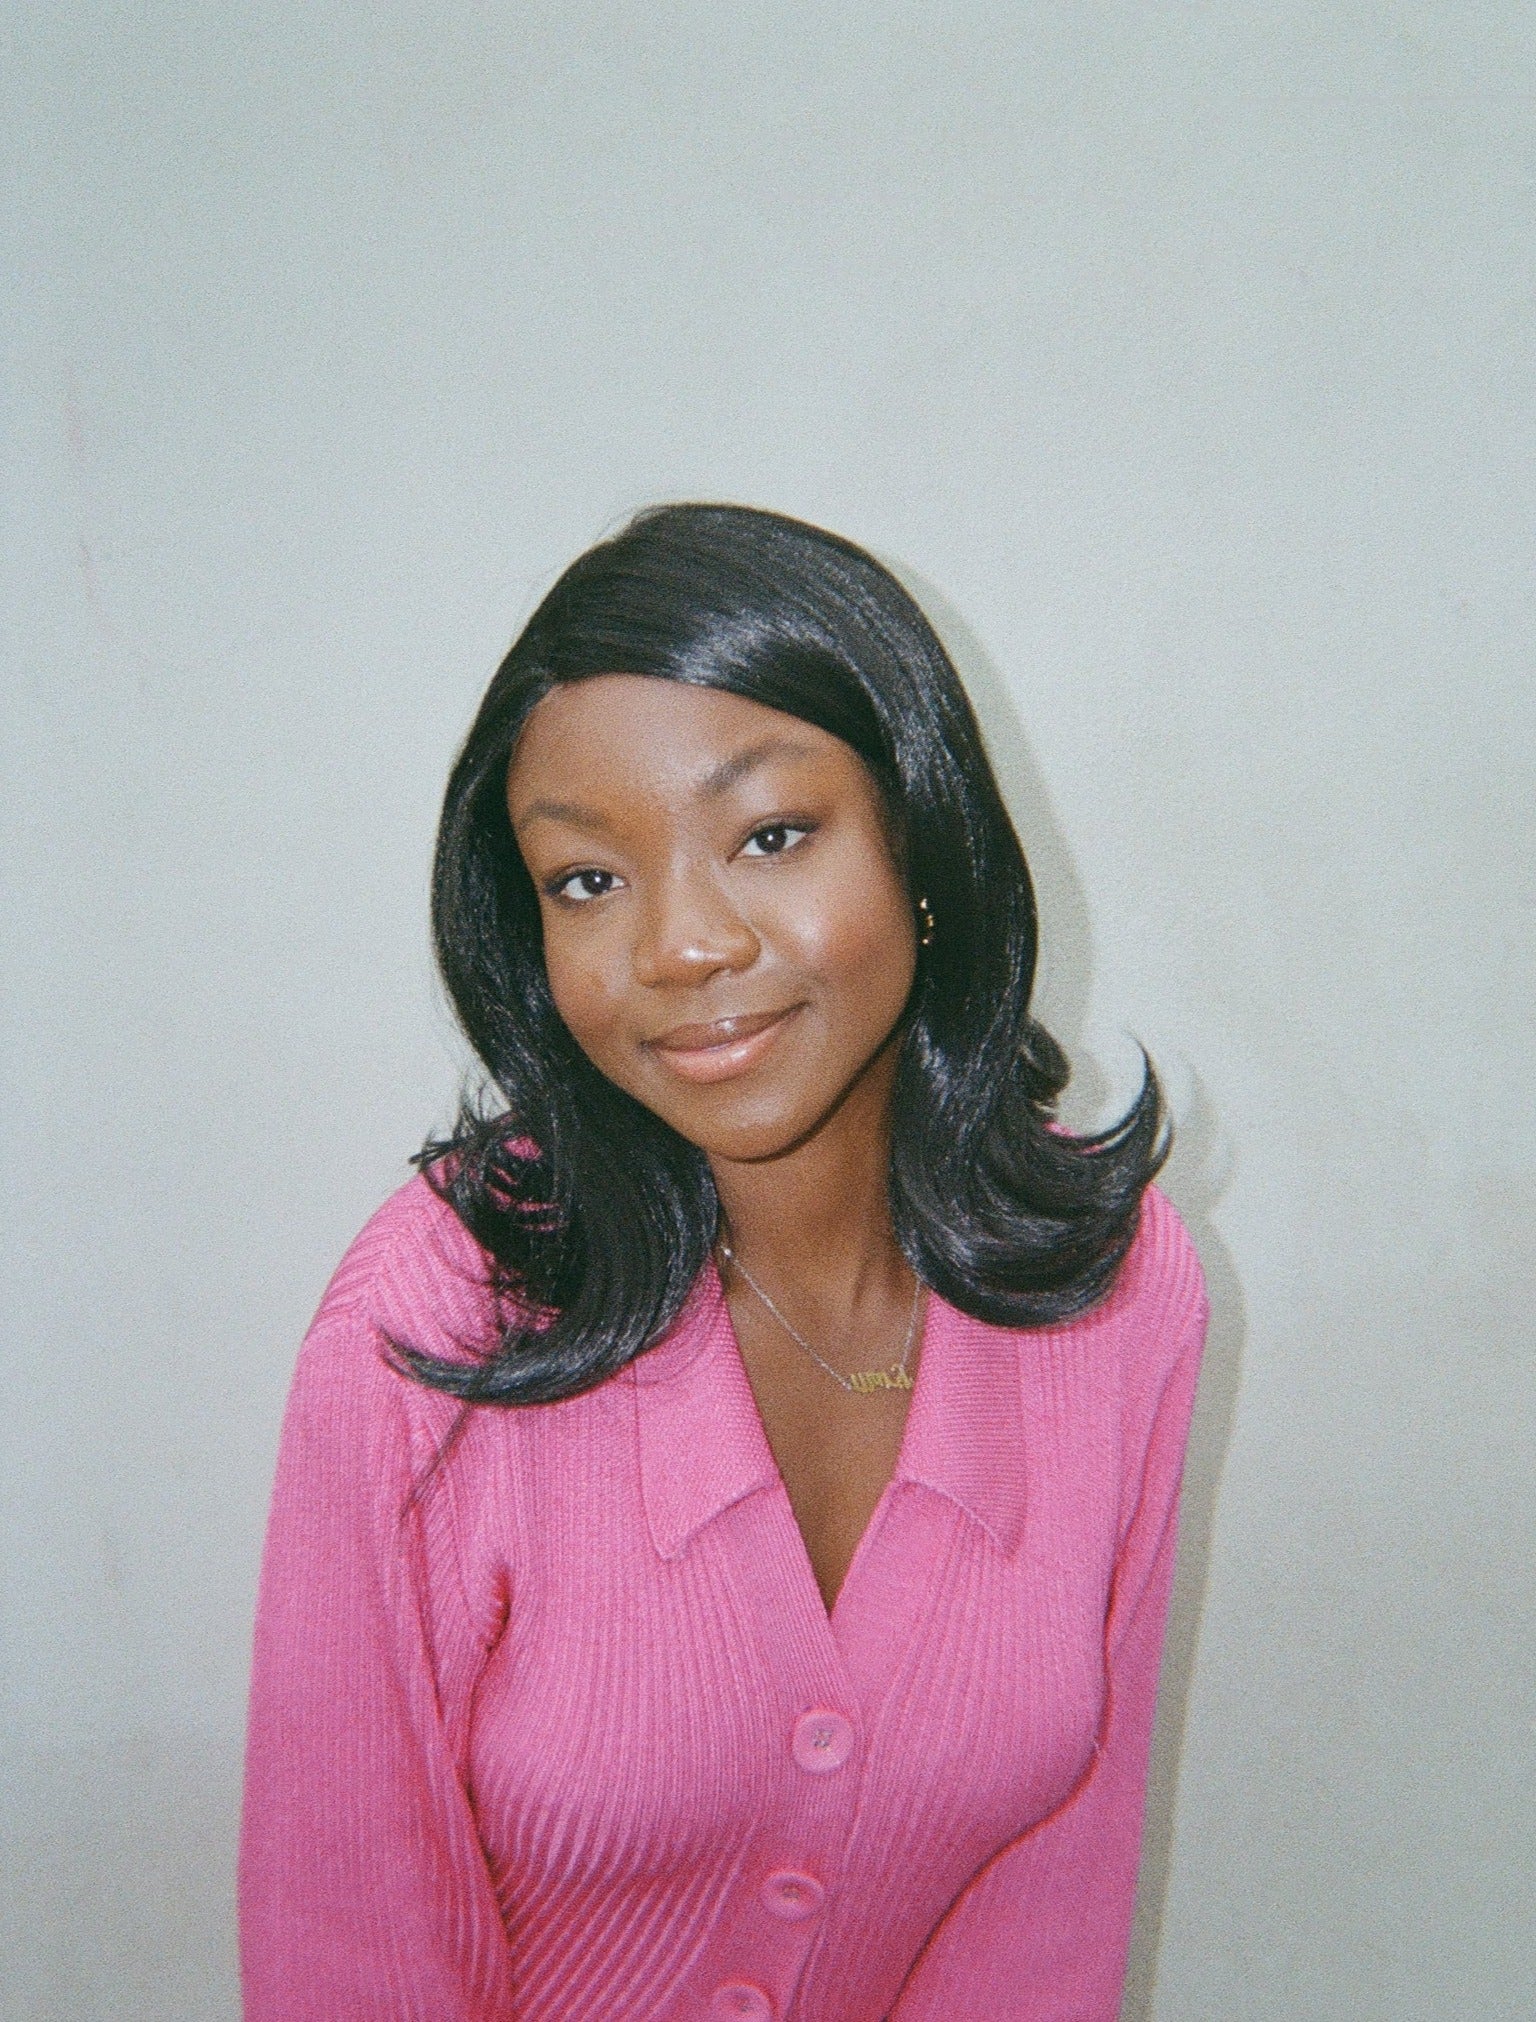 A stylish woman wearing a pink outfit poses for a photo, her black synthetic hair wig with flipped ends completing her trendy outfit.